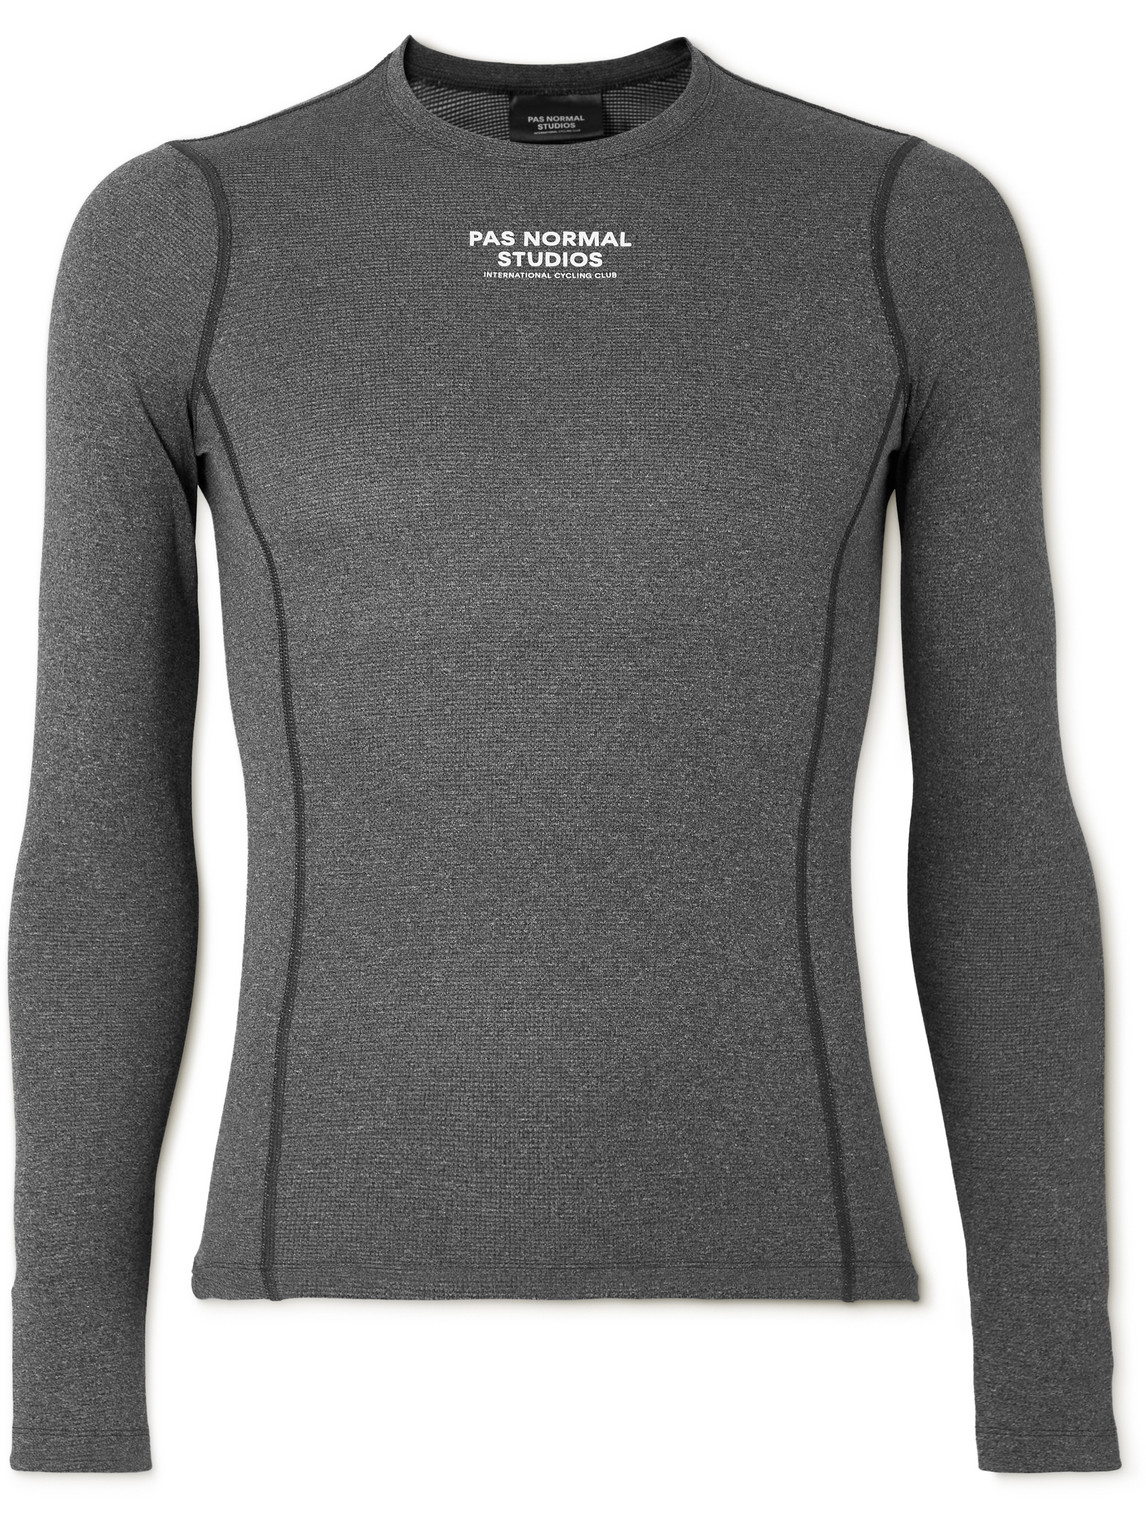 Pas Normal Studios Control Mid Ls Base Layer In Black